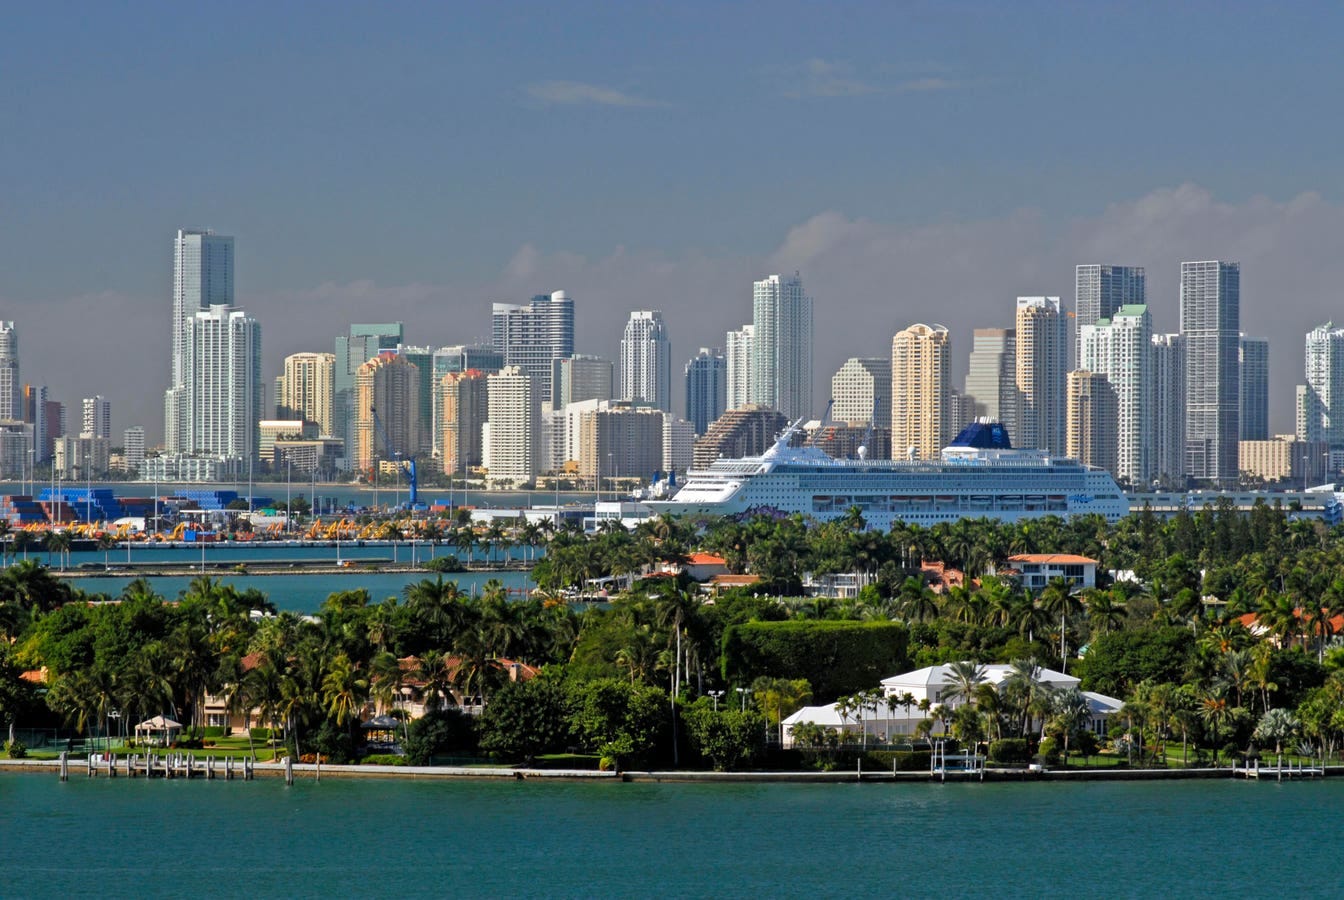 Downtown Miami Is A Rising Star Among The Galaxy Of Burgeoning Cities